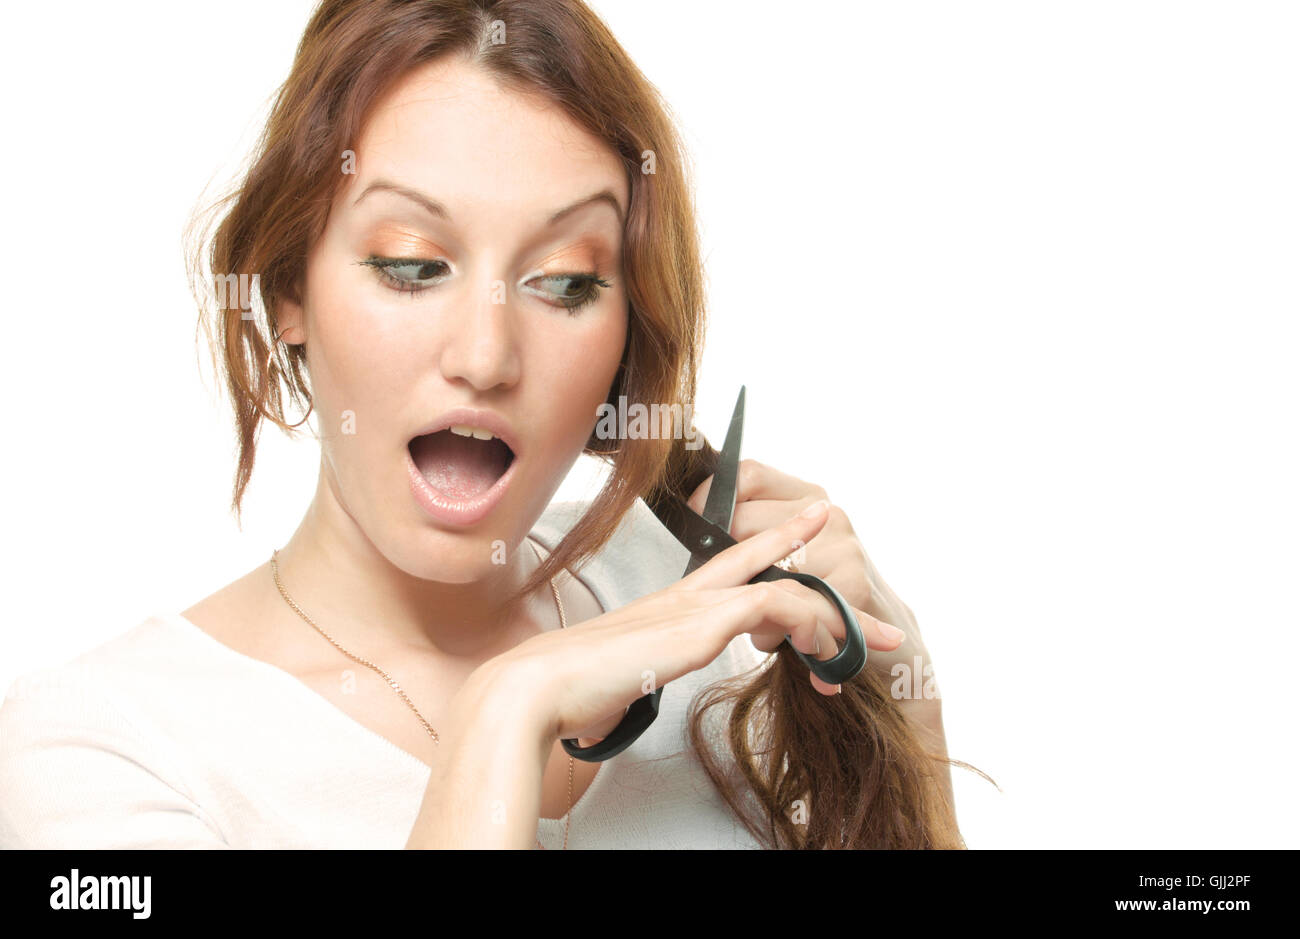 woman face adult Stock Photo